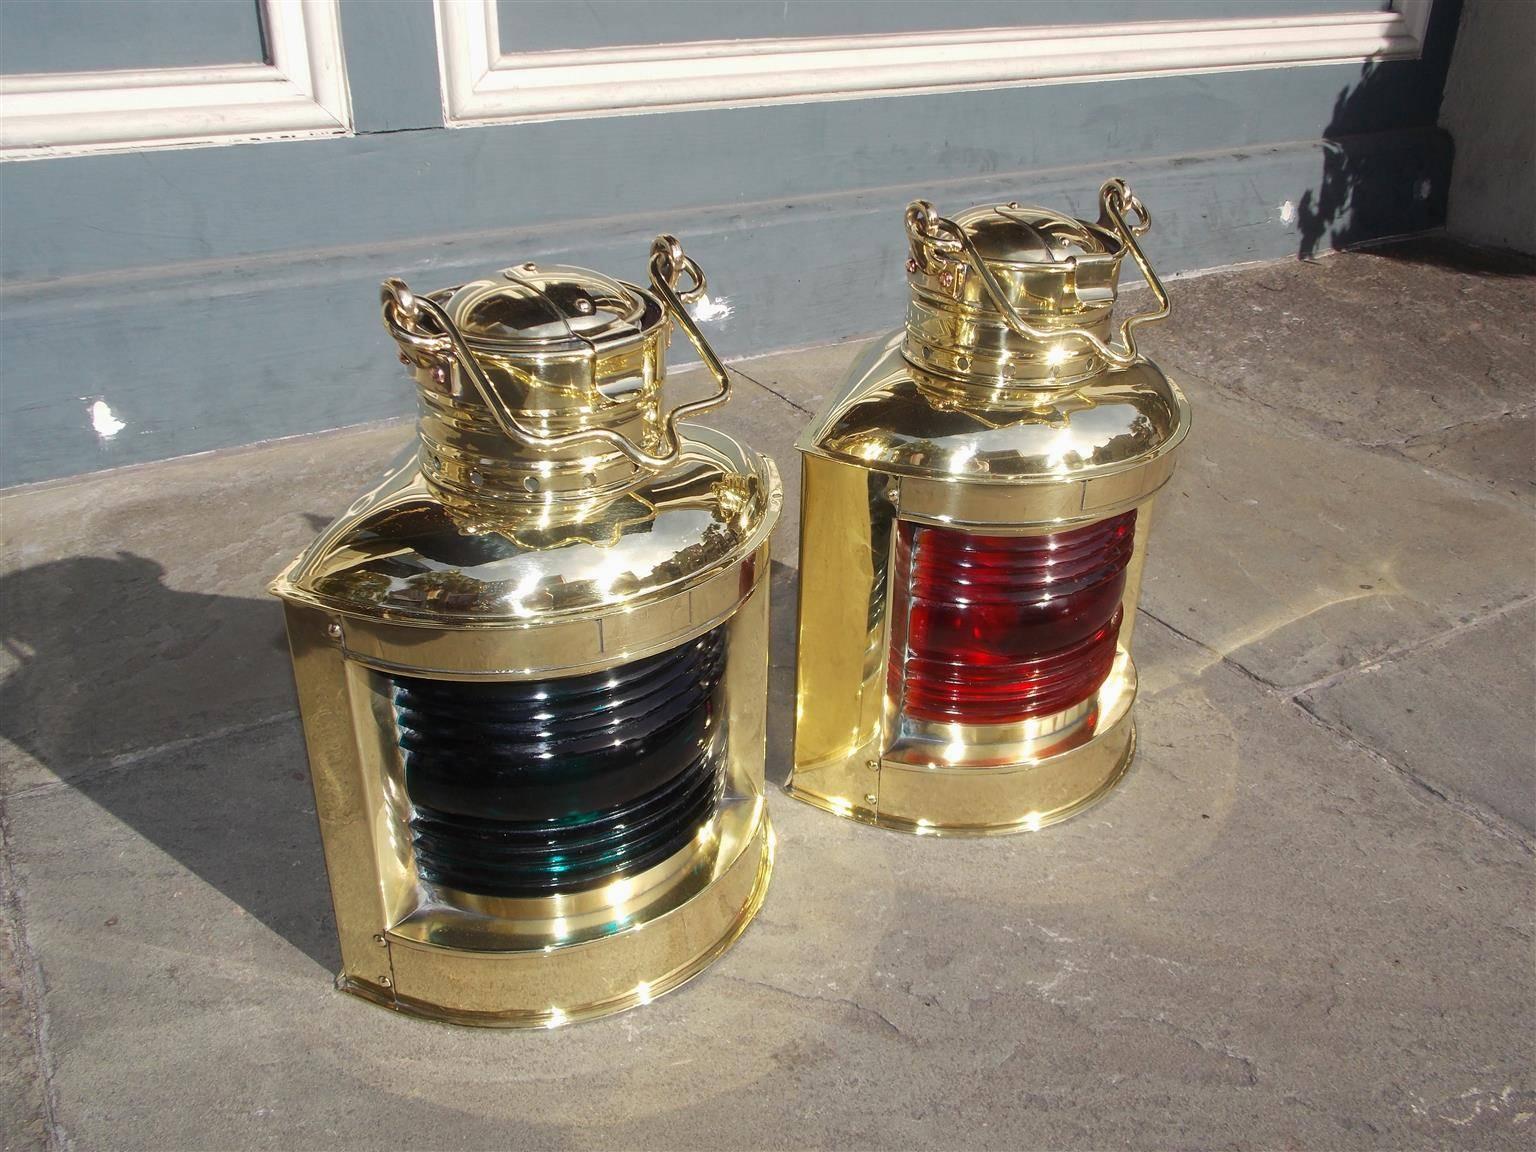 Pair of American port and starboard solid brass Perko ship lanterns with the original Fresnel colored lenses, vented tops, carrying handles, and original side mounting brackets, Early 20th century, Brooklyn, NY.